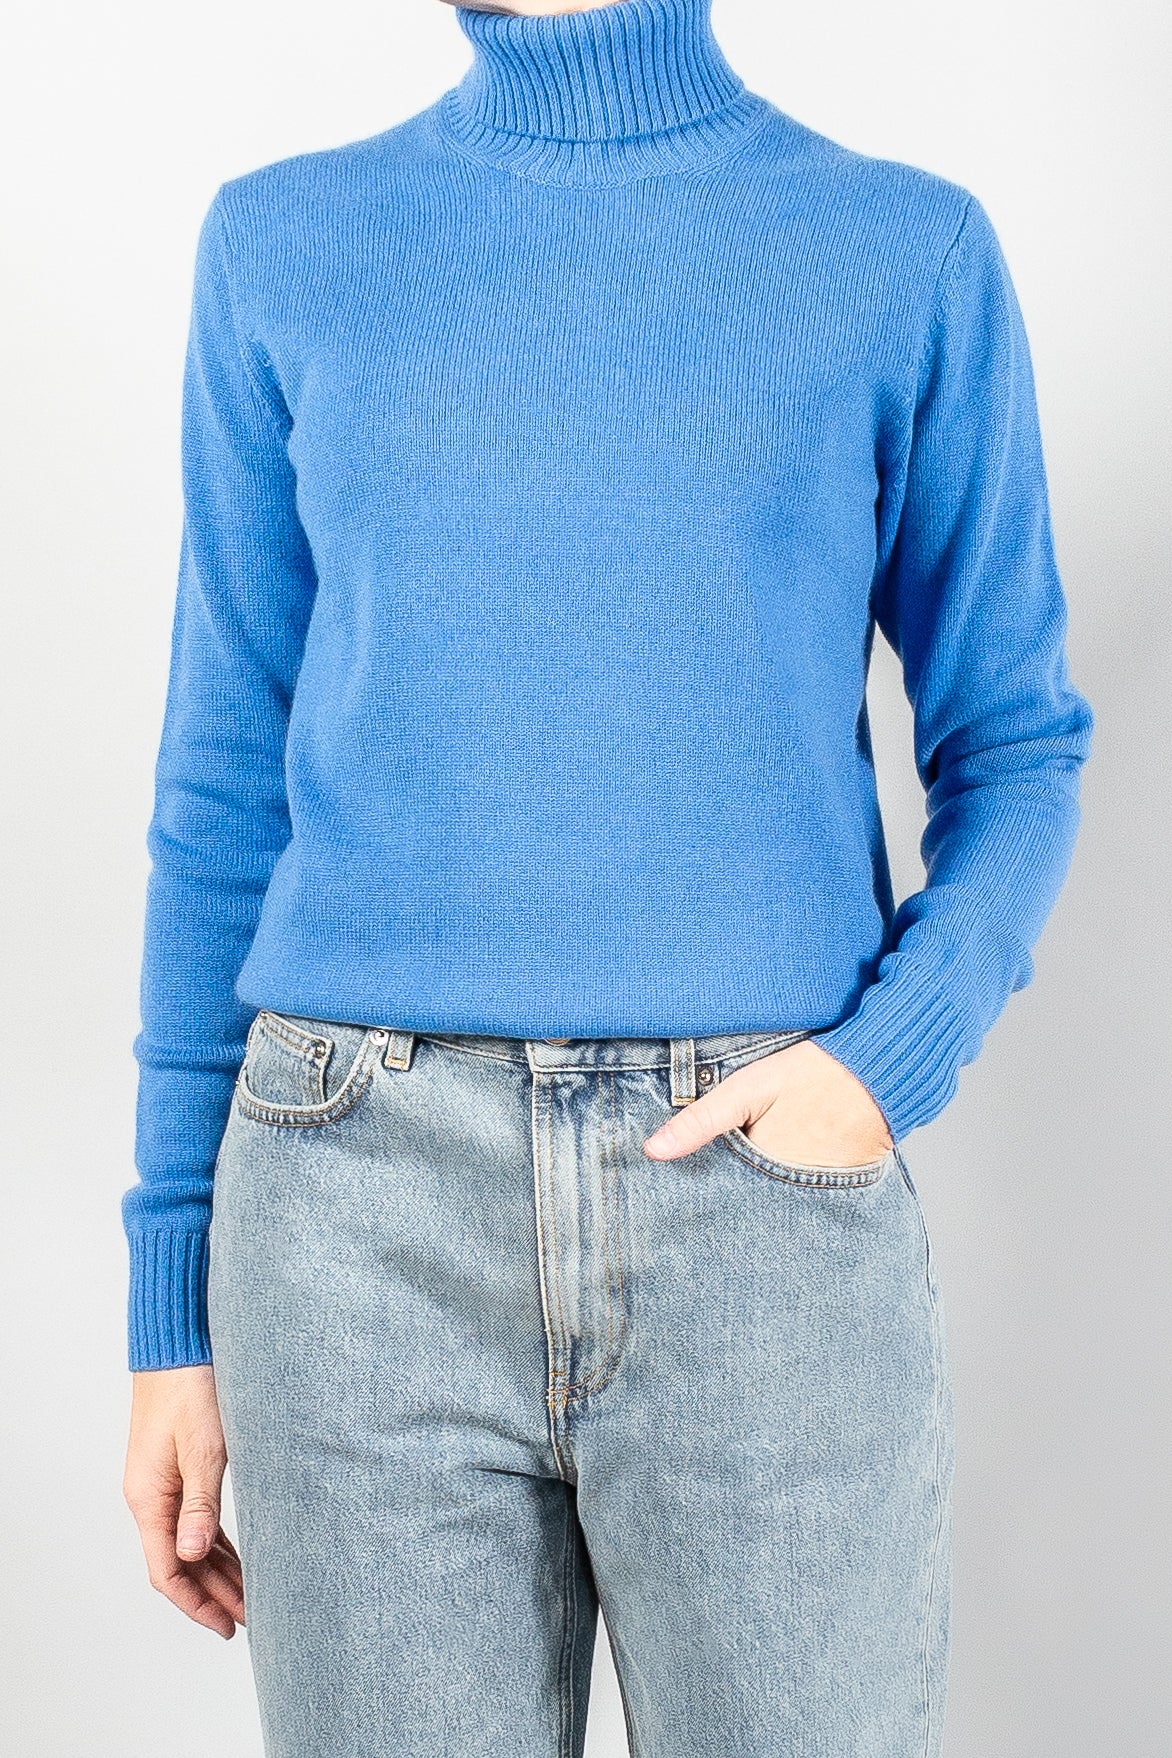 Closed Roll Neck Long Sleeve-Tops-Misch-Boutique-Vancouver-Canada-misch.ca